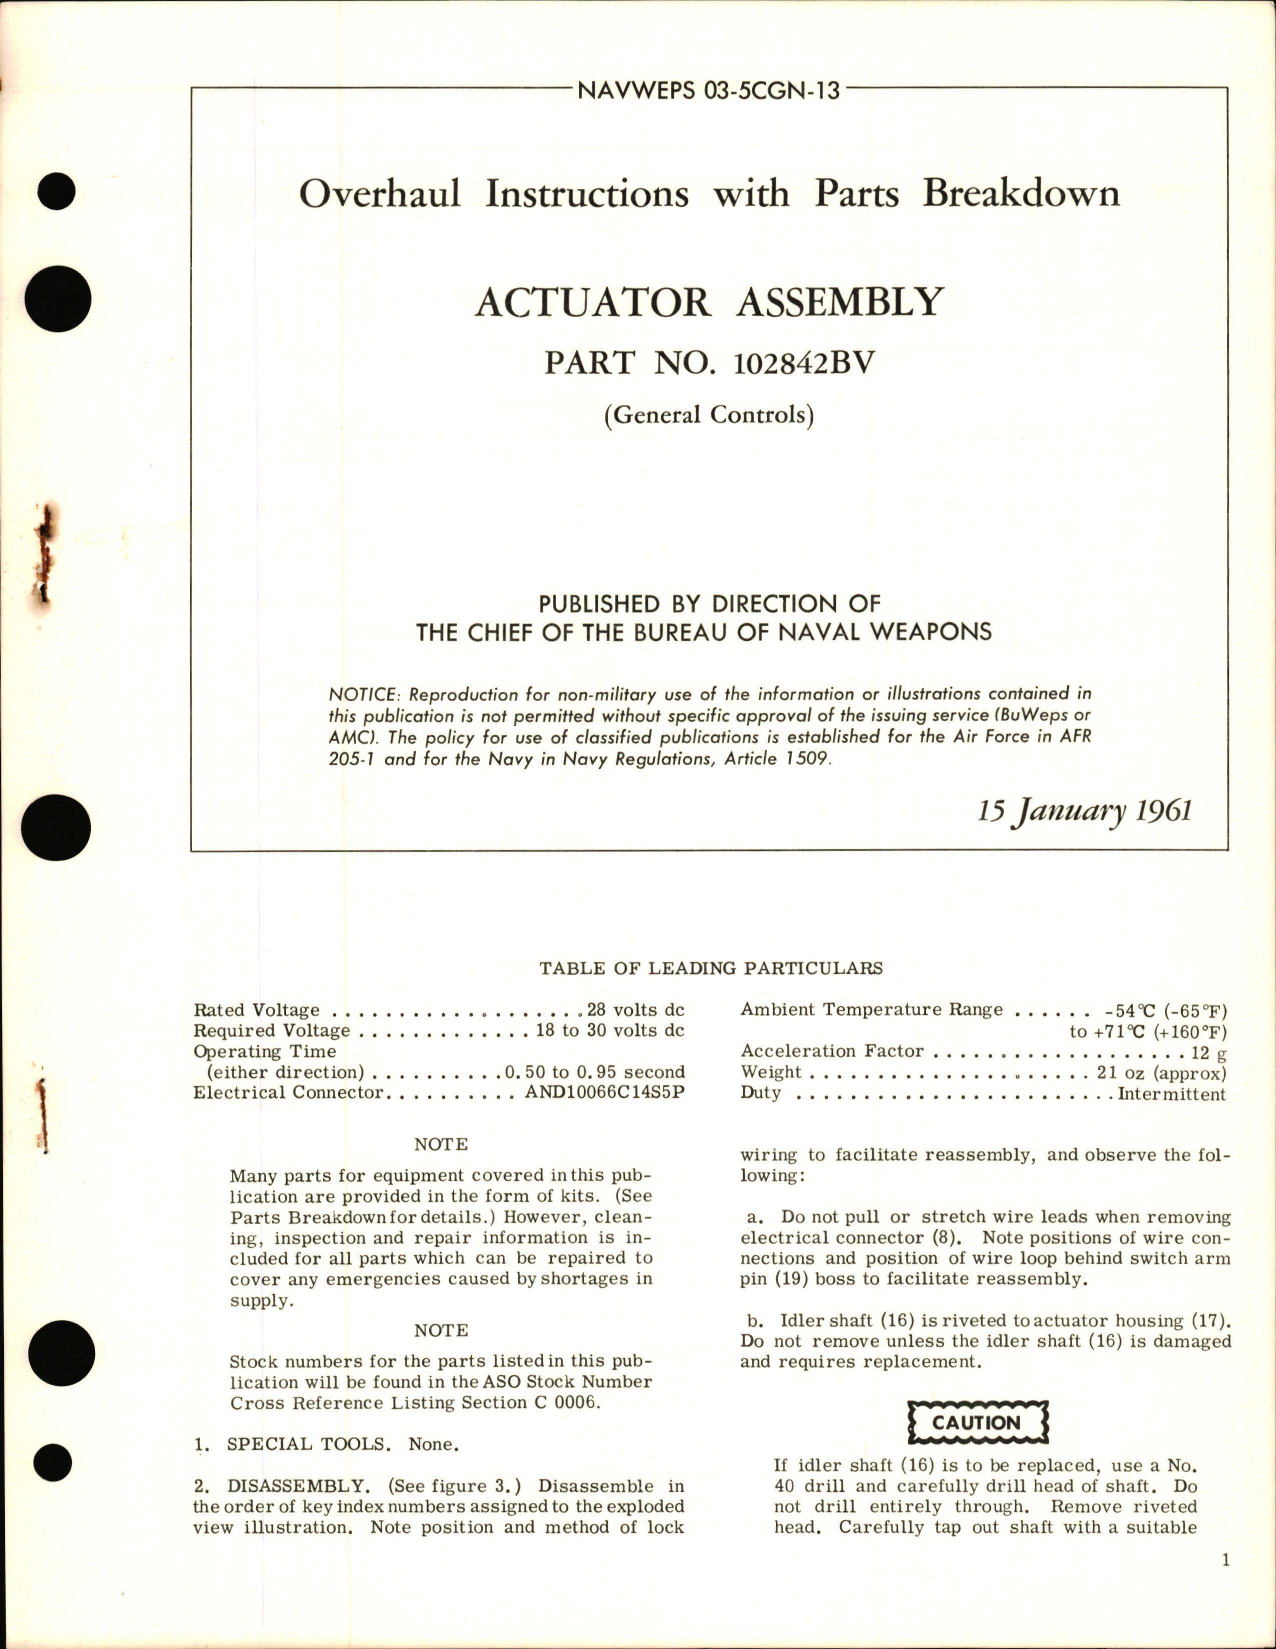 Sample page 1 from AirCorps Library document: Overhaul Instructions with Parts Breakdown for Actuator Assembly - Part 102842BV 